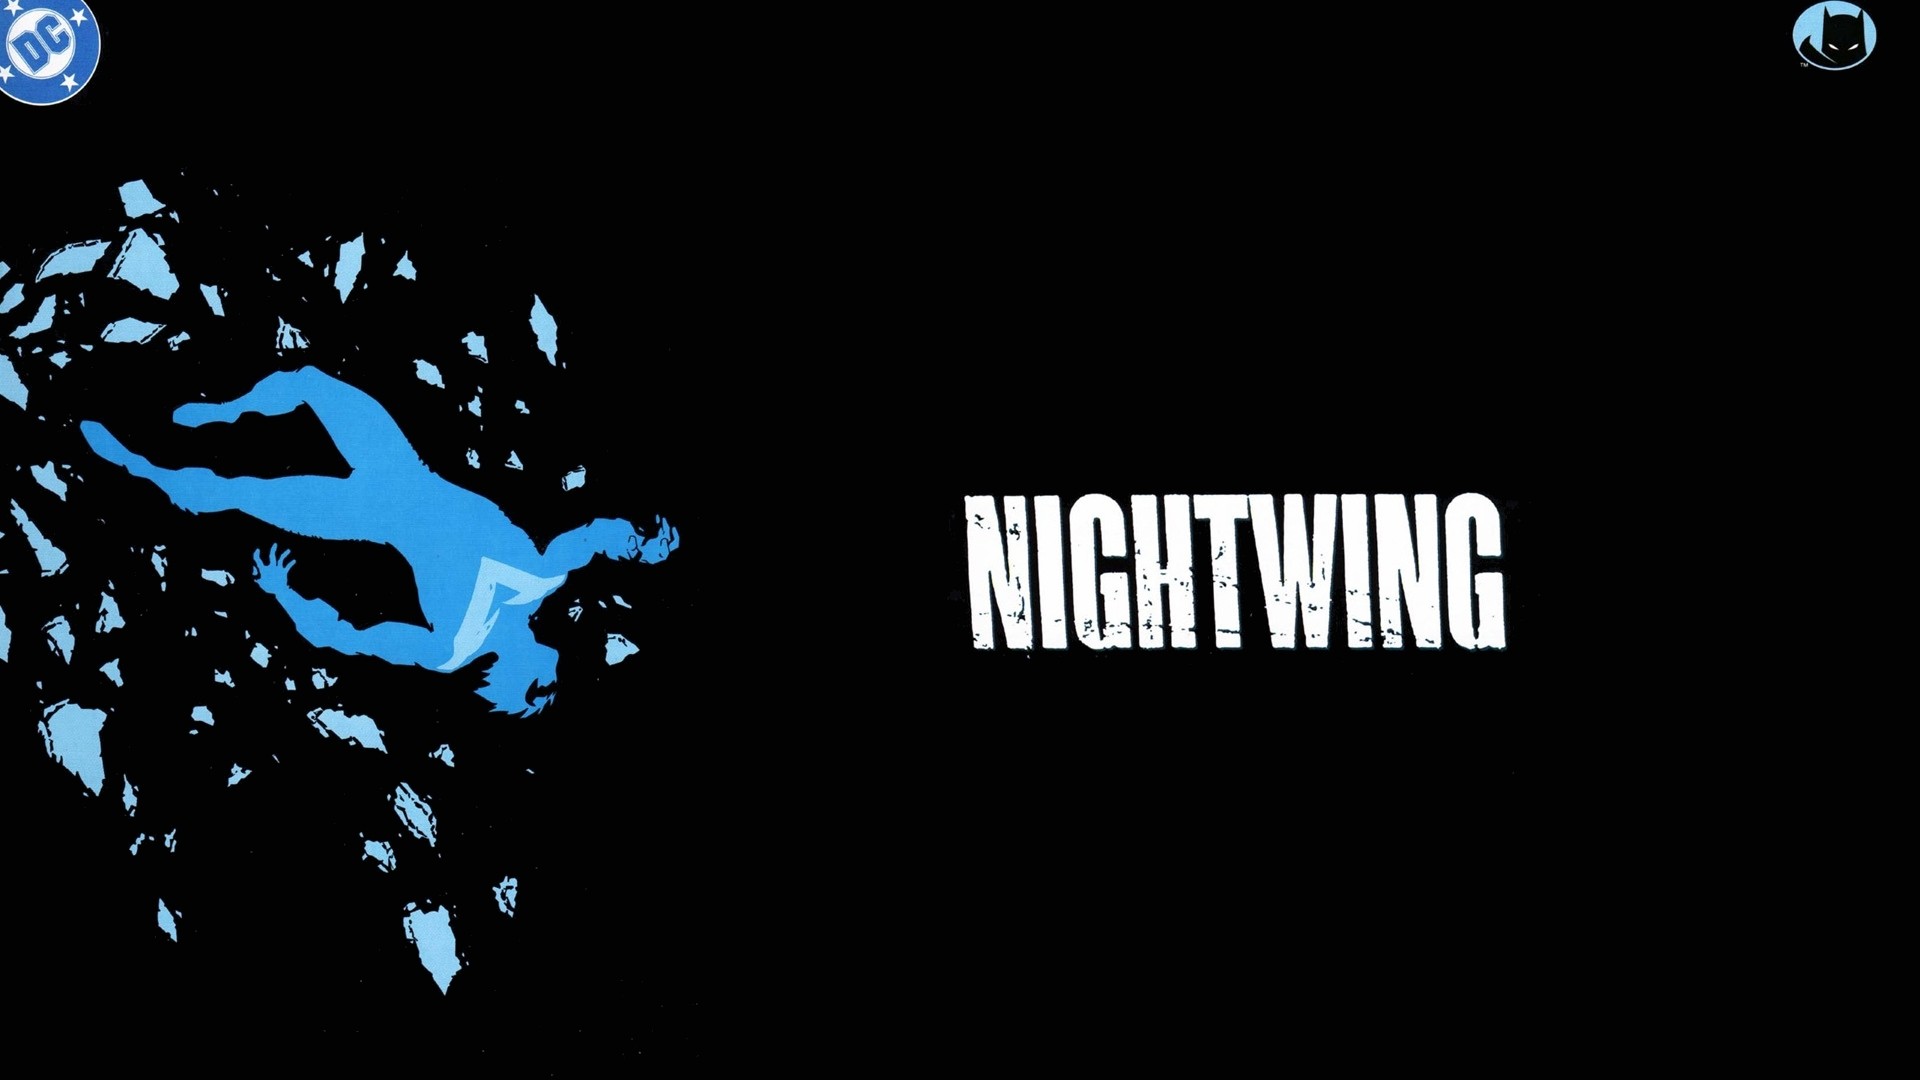 Nightwing Background Hd , HD Wallpaper & Backgrounds